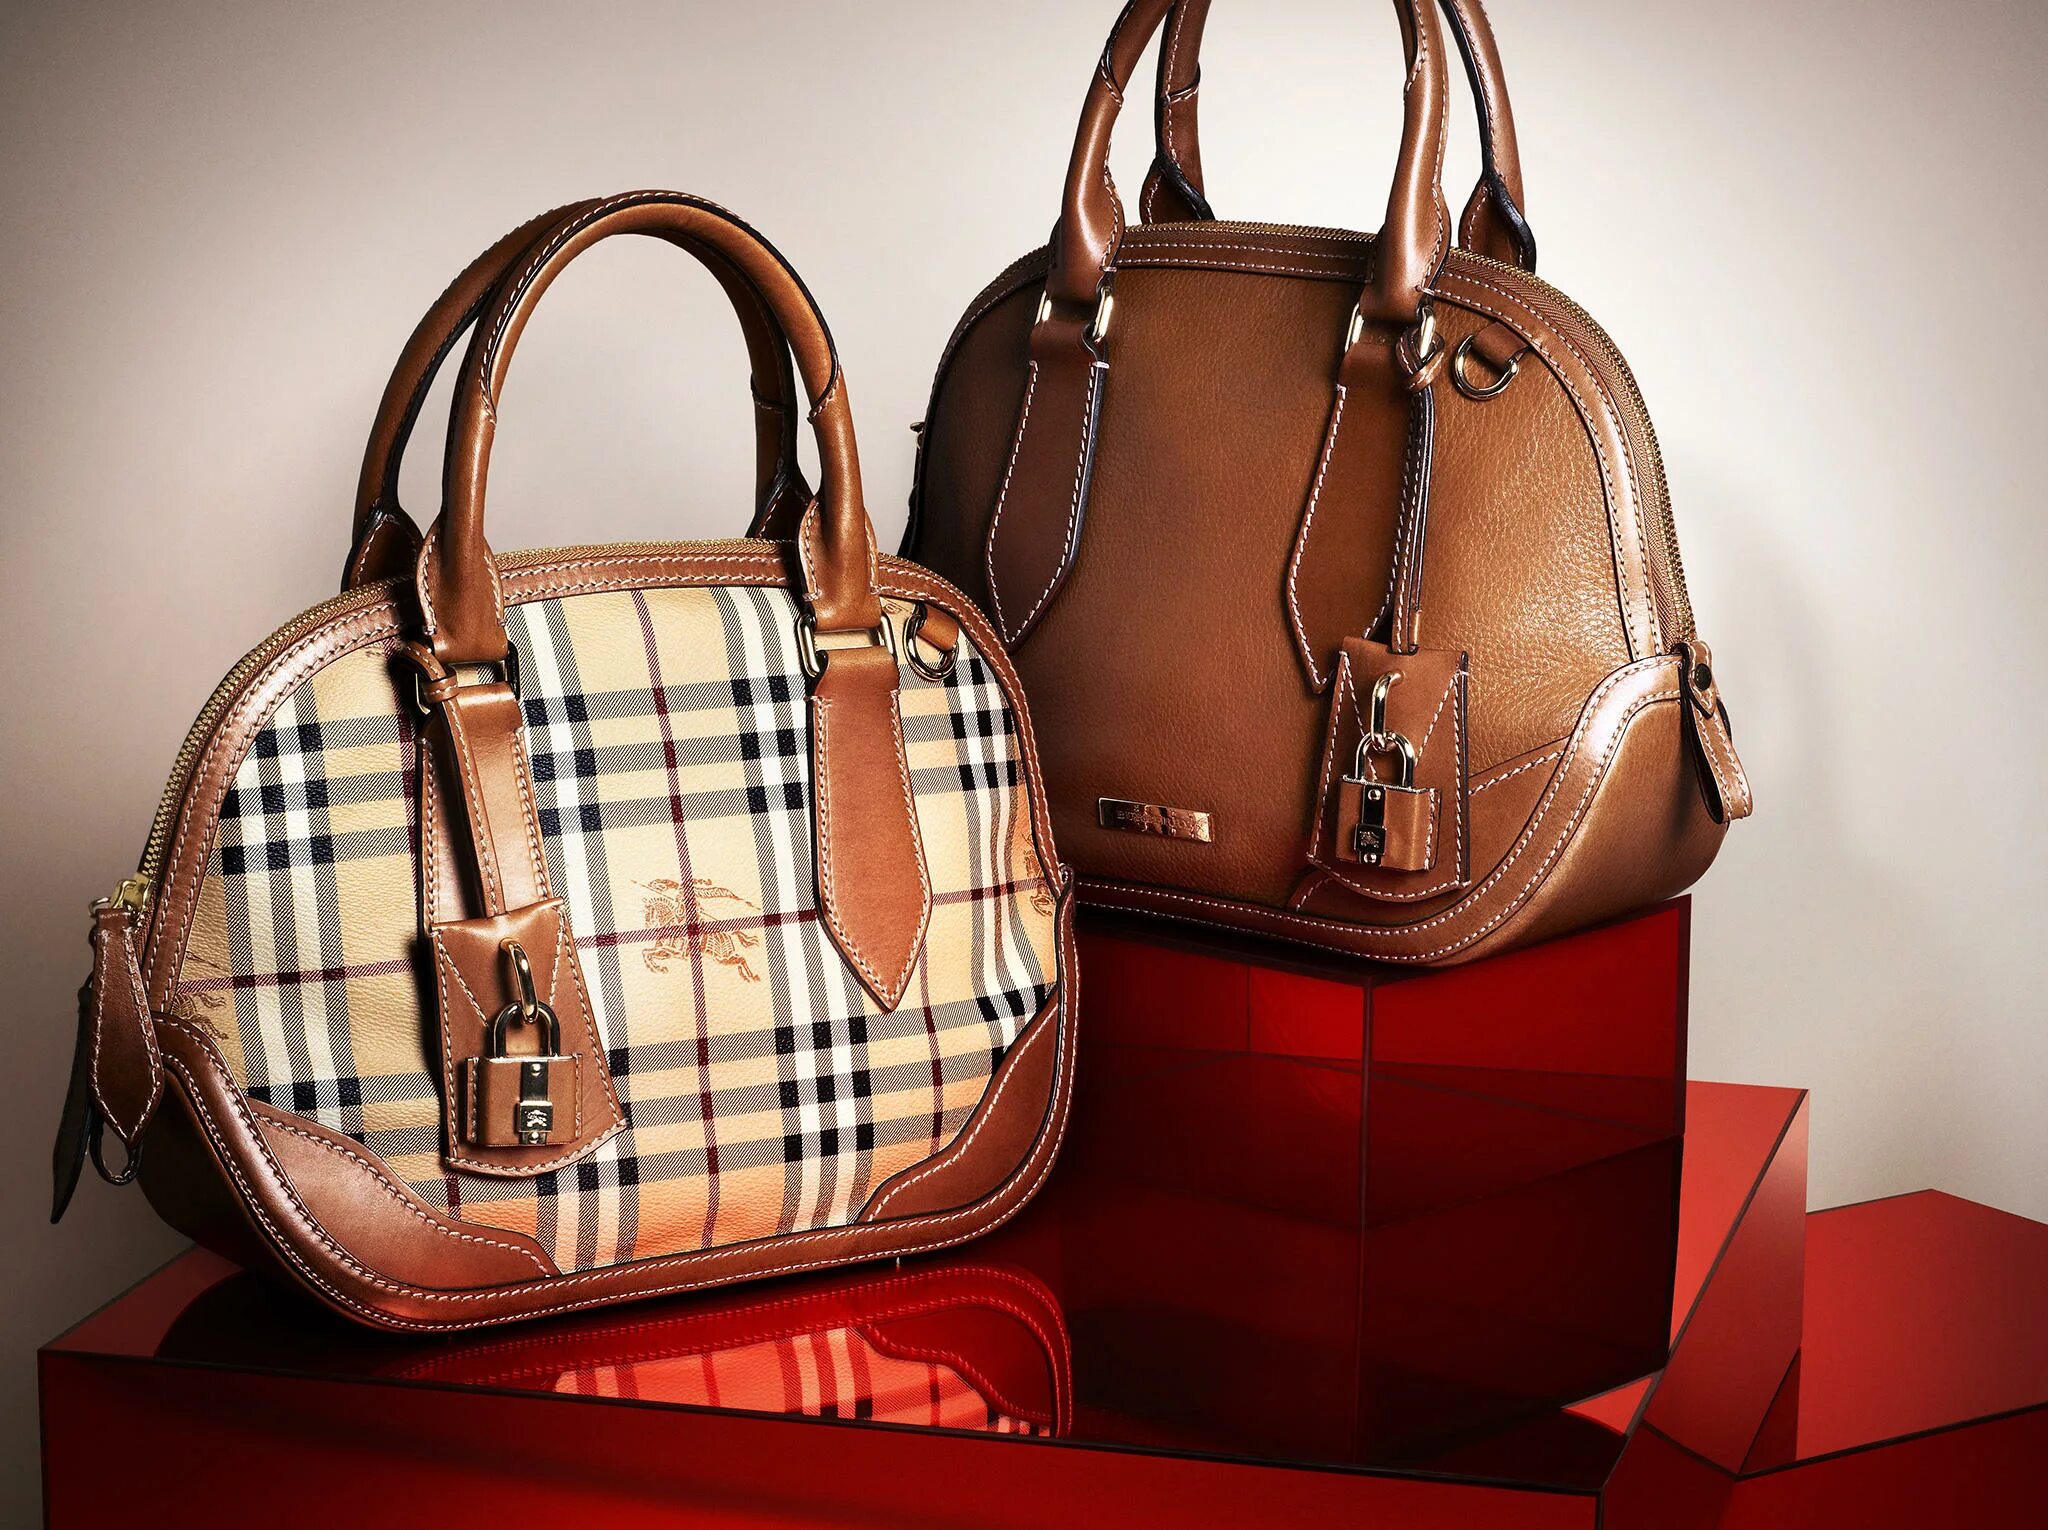 Collection bags. Burberry сумки 2014. Сумка Burberry коллекции 2014. Burberry Bags 2013. Берберри 2013 коллекция Burberry.